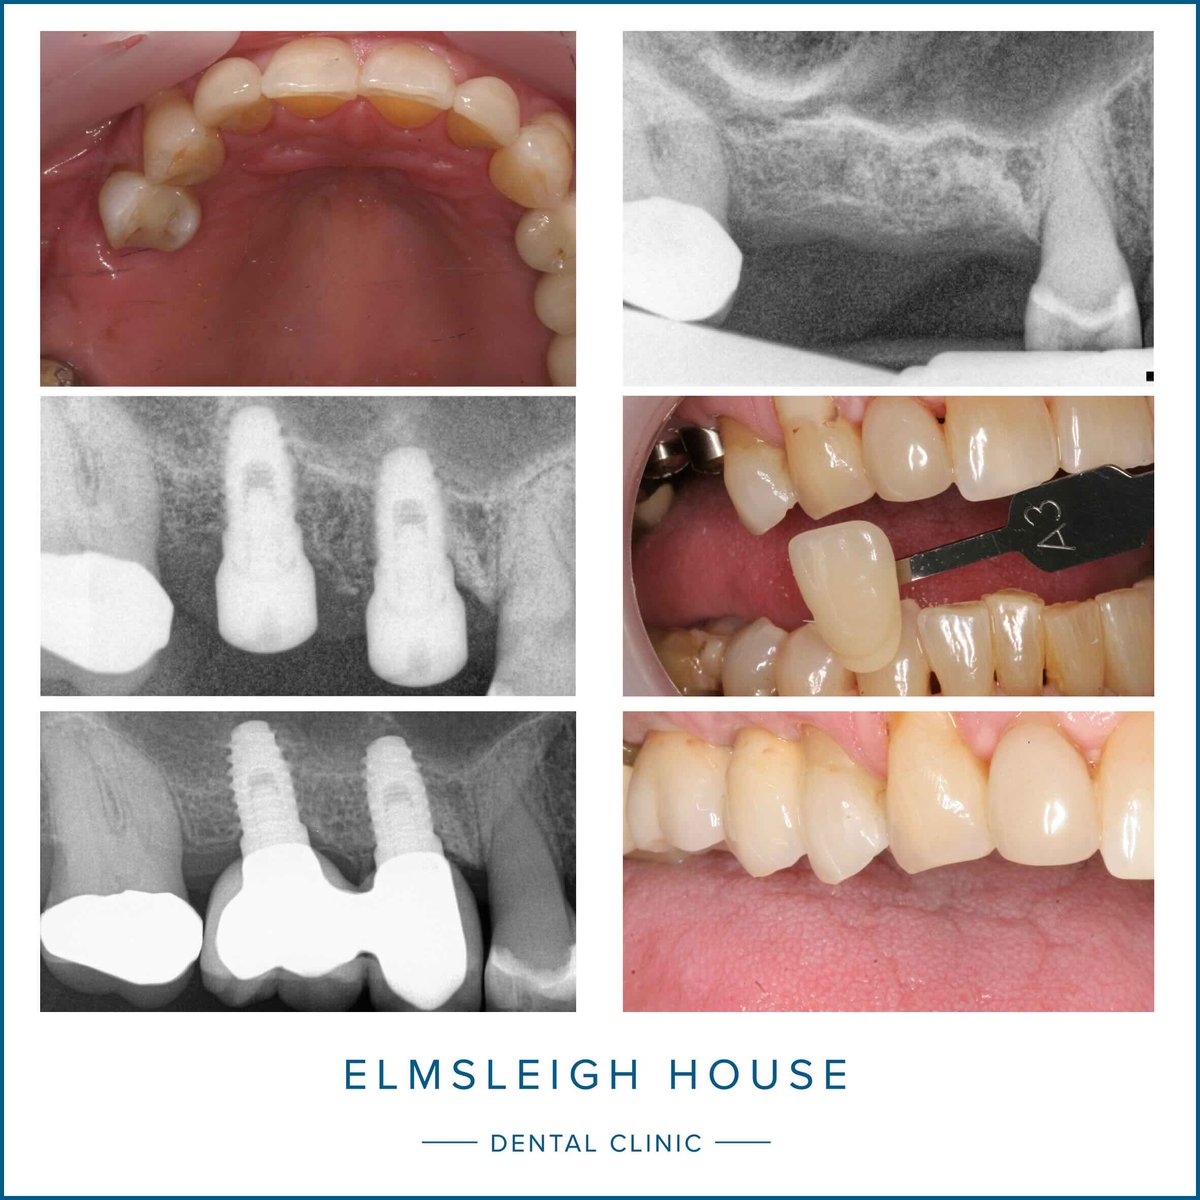 Kit Spears performed two mini sinus lifts with regenerative techniques and placed two dental implants and implant-retained crowns to replace Mrs B's missing teeth

Read our blog - elmsleighhouse.co.uk/blog/mini-sinu…

#ElmsleighDental #dentalimplants #DrKitSpears #FarnhamDentist #HappyPatient